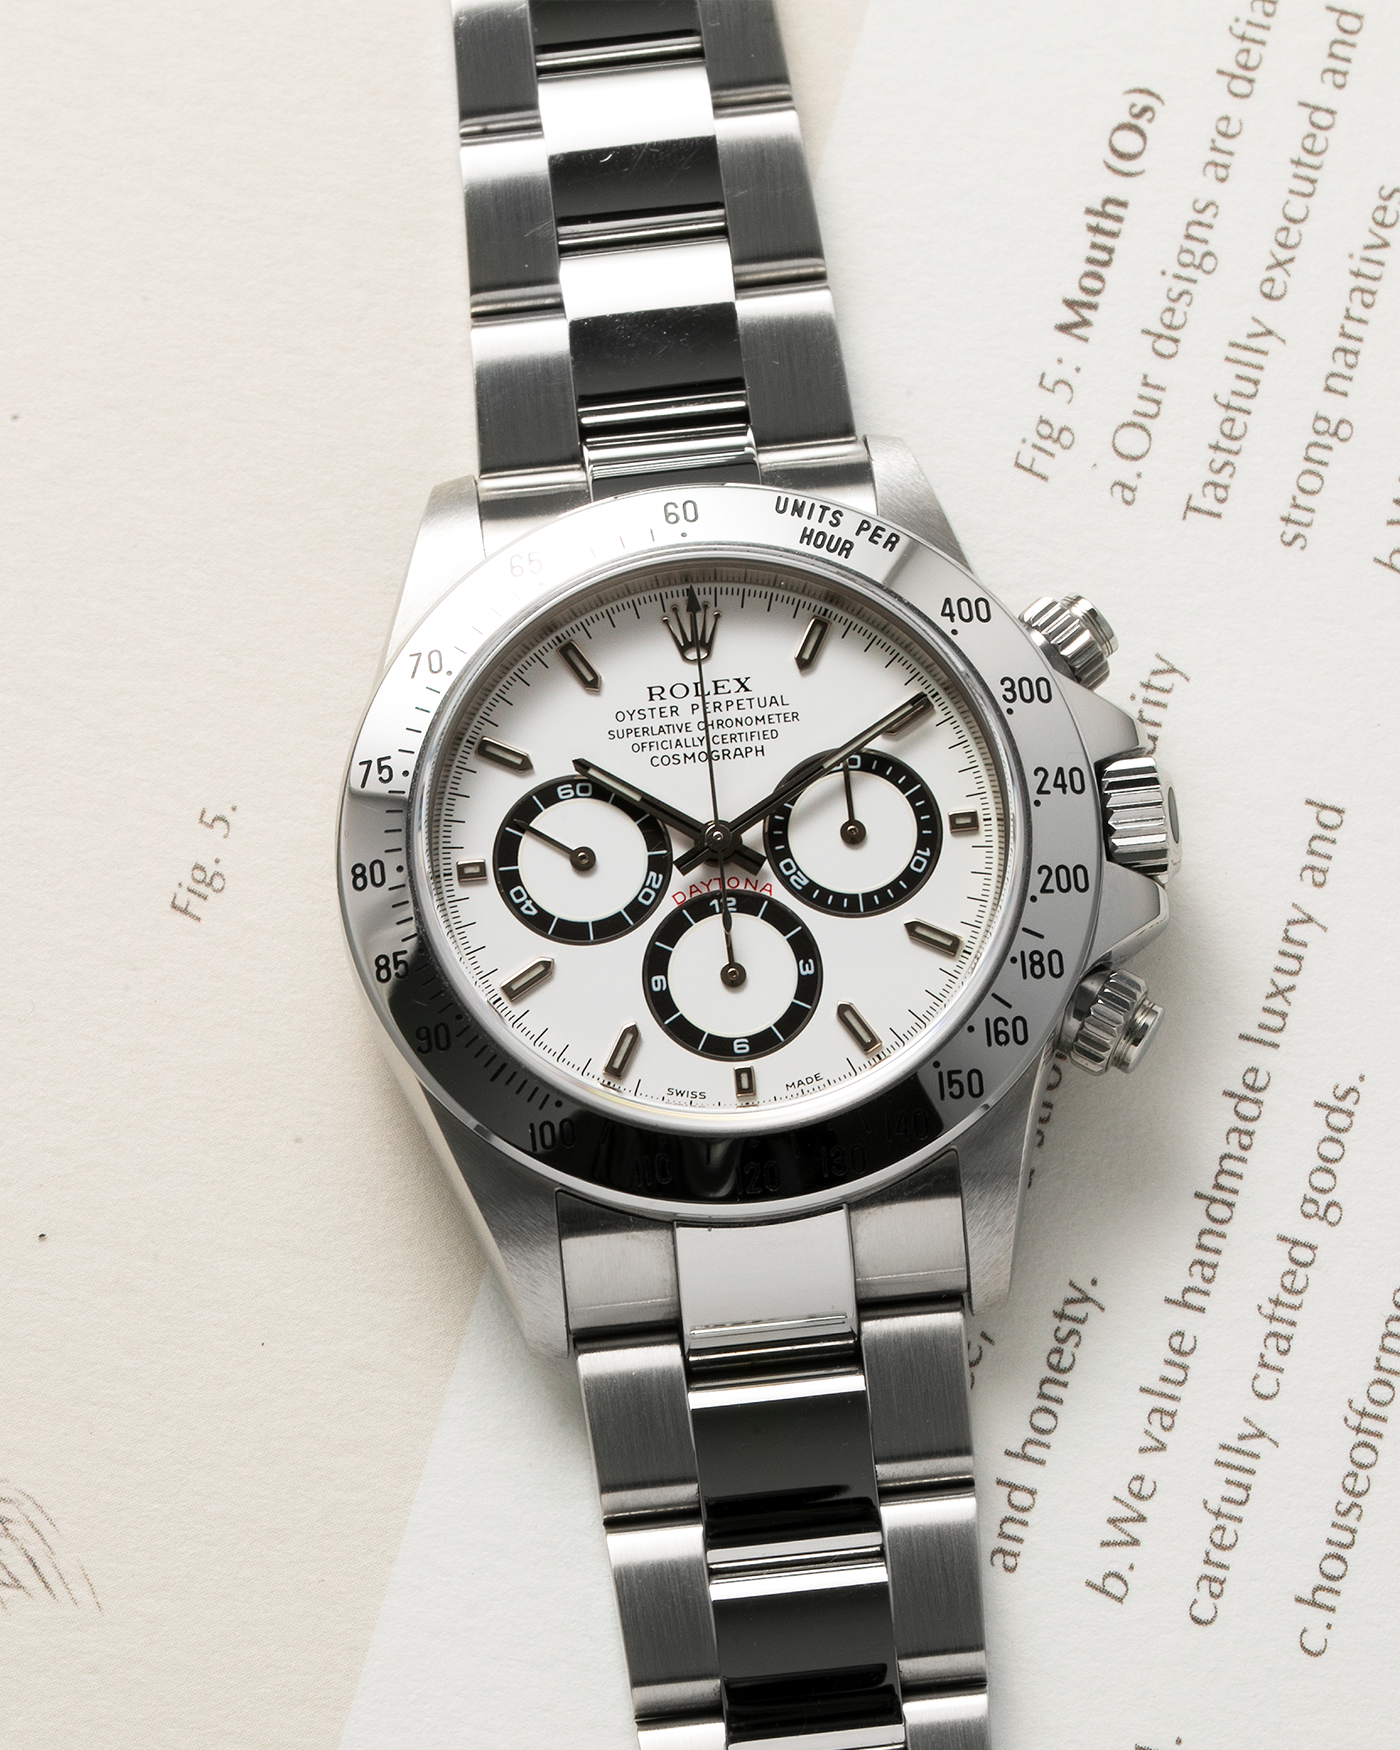 Brand: Rolex Year: 1999 Model: Cosmograph Daytona Reference: 16520 Serial Number: A342XXX Material: Stainless Steel Movement: Rolex (Based on the Zenith El Primero Cal. 400) Cal. 4030, Self-Winding Case Diameter: 40mm Bracelet: Rolex Stainless Steel 78390A Oyster Bracelet